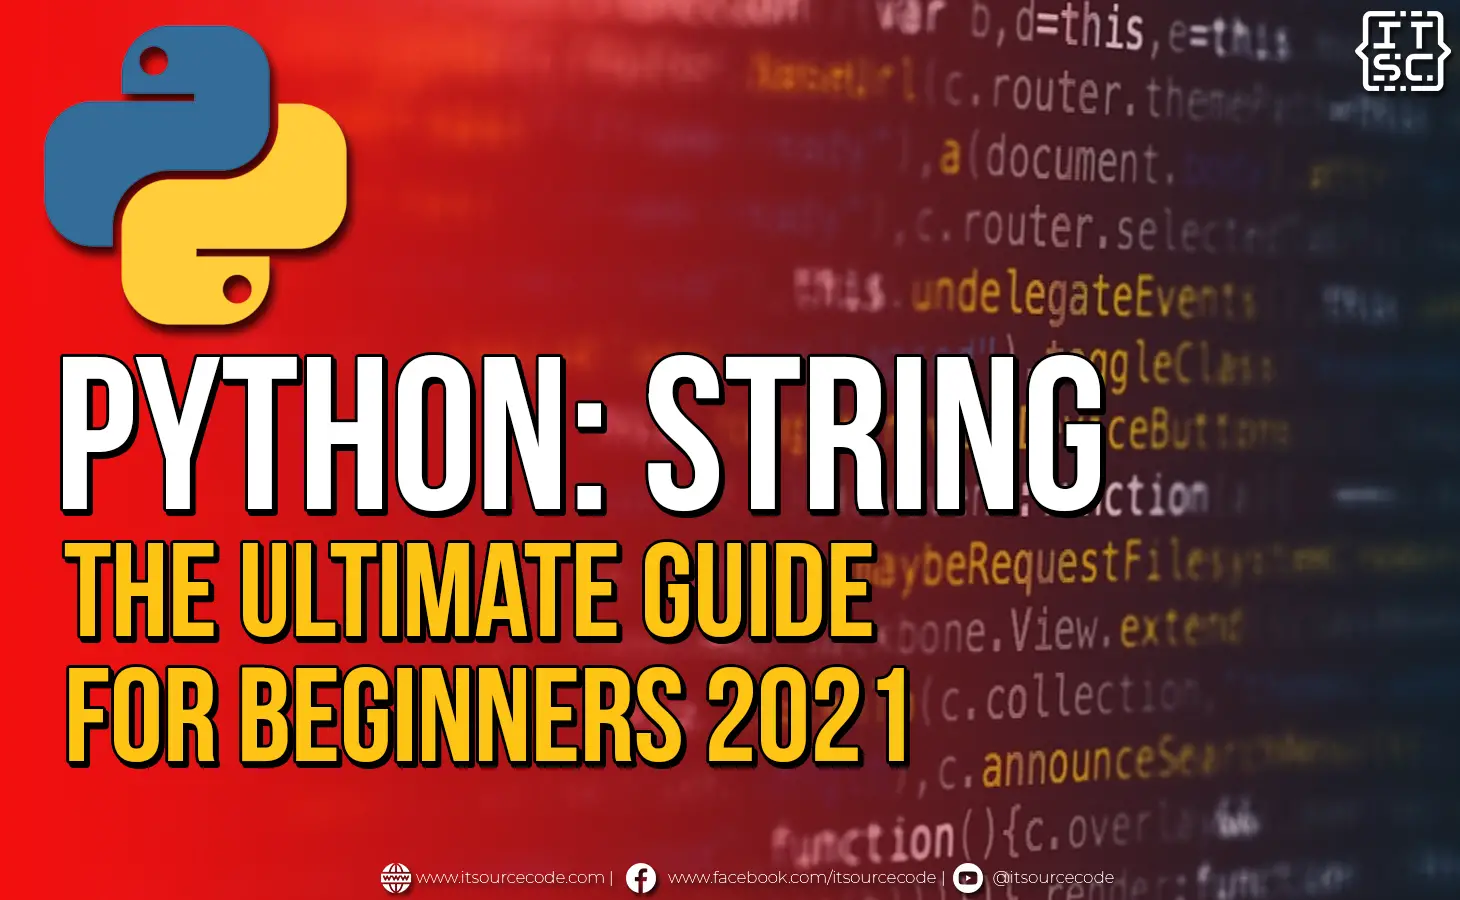 Python String : The Ultimate Guide For Beginners 2021